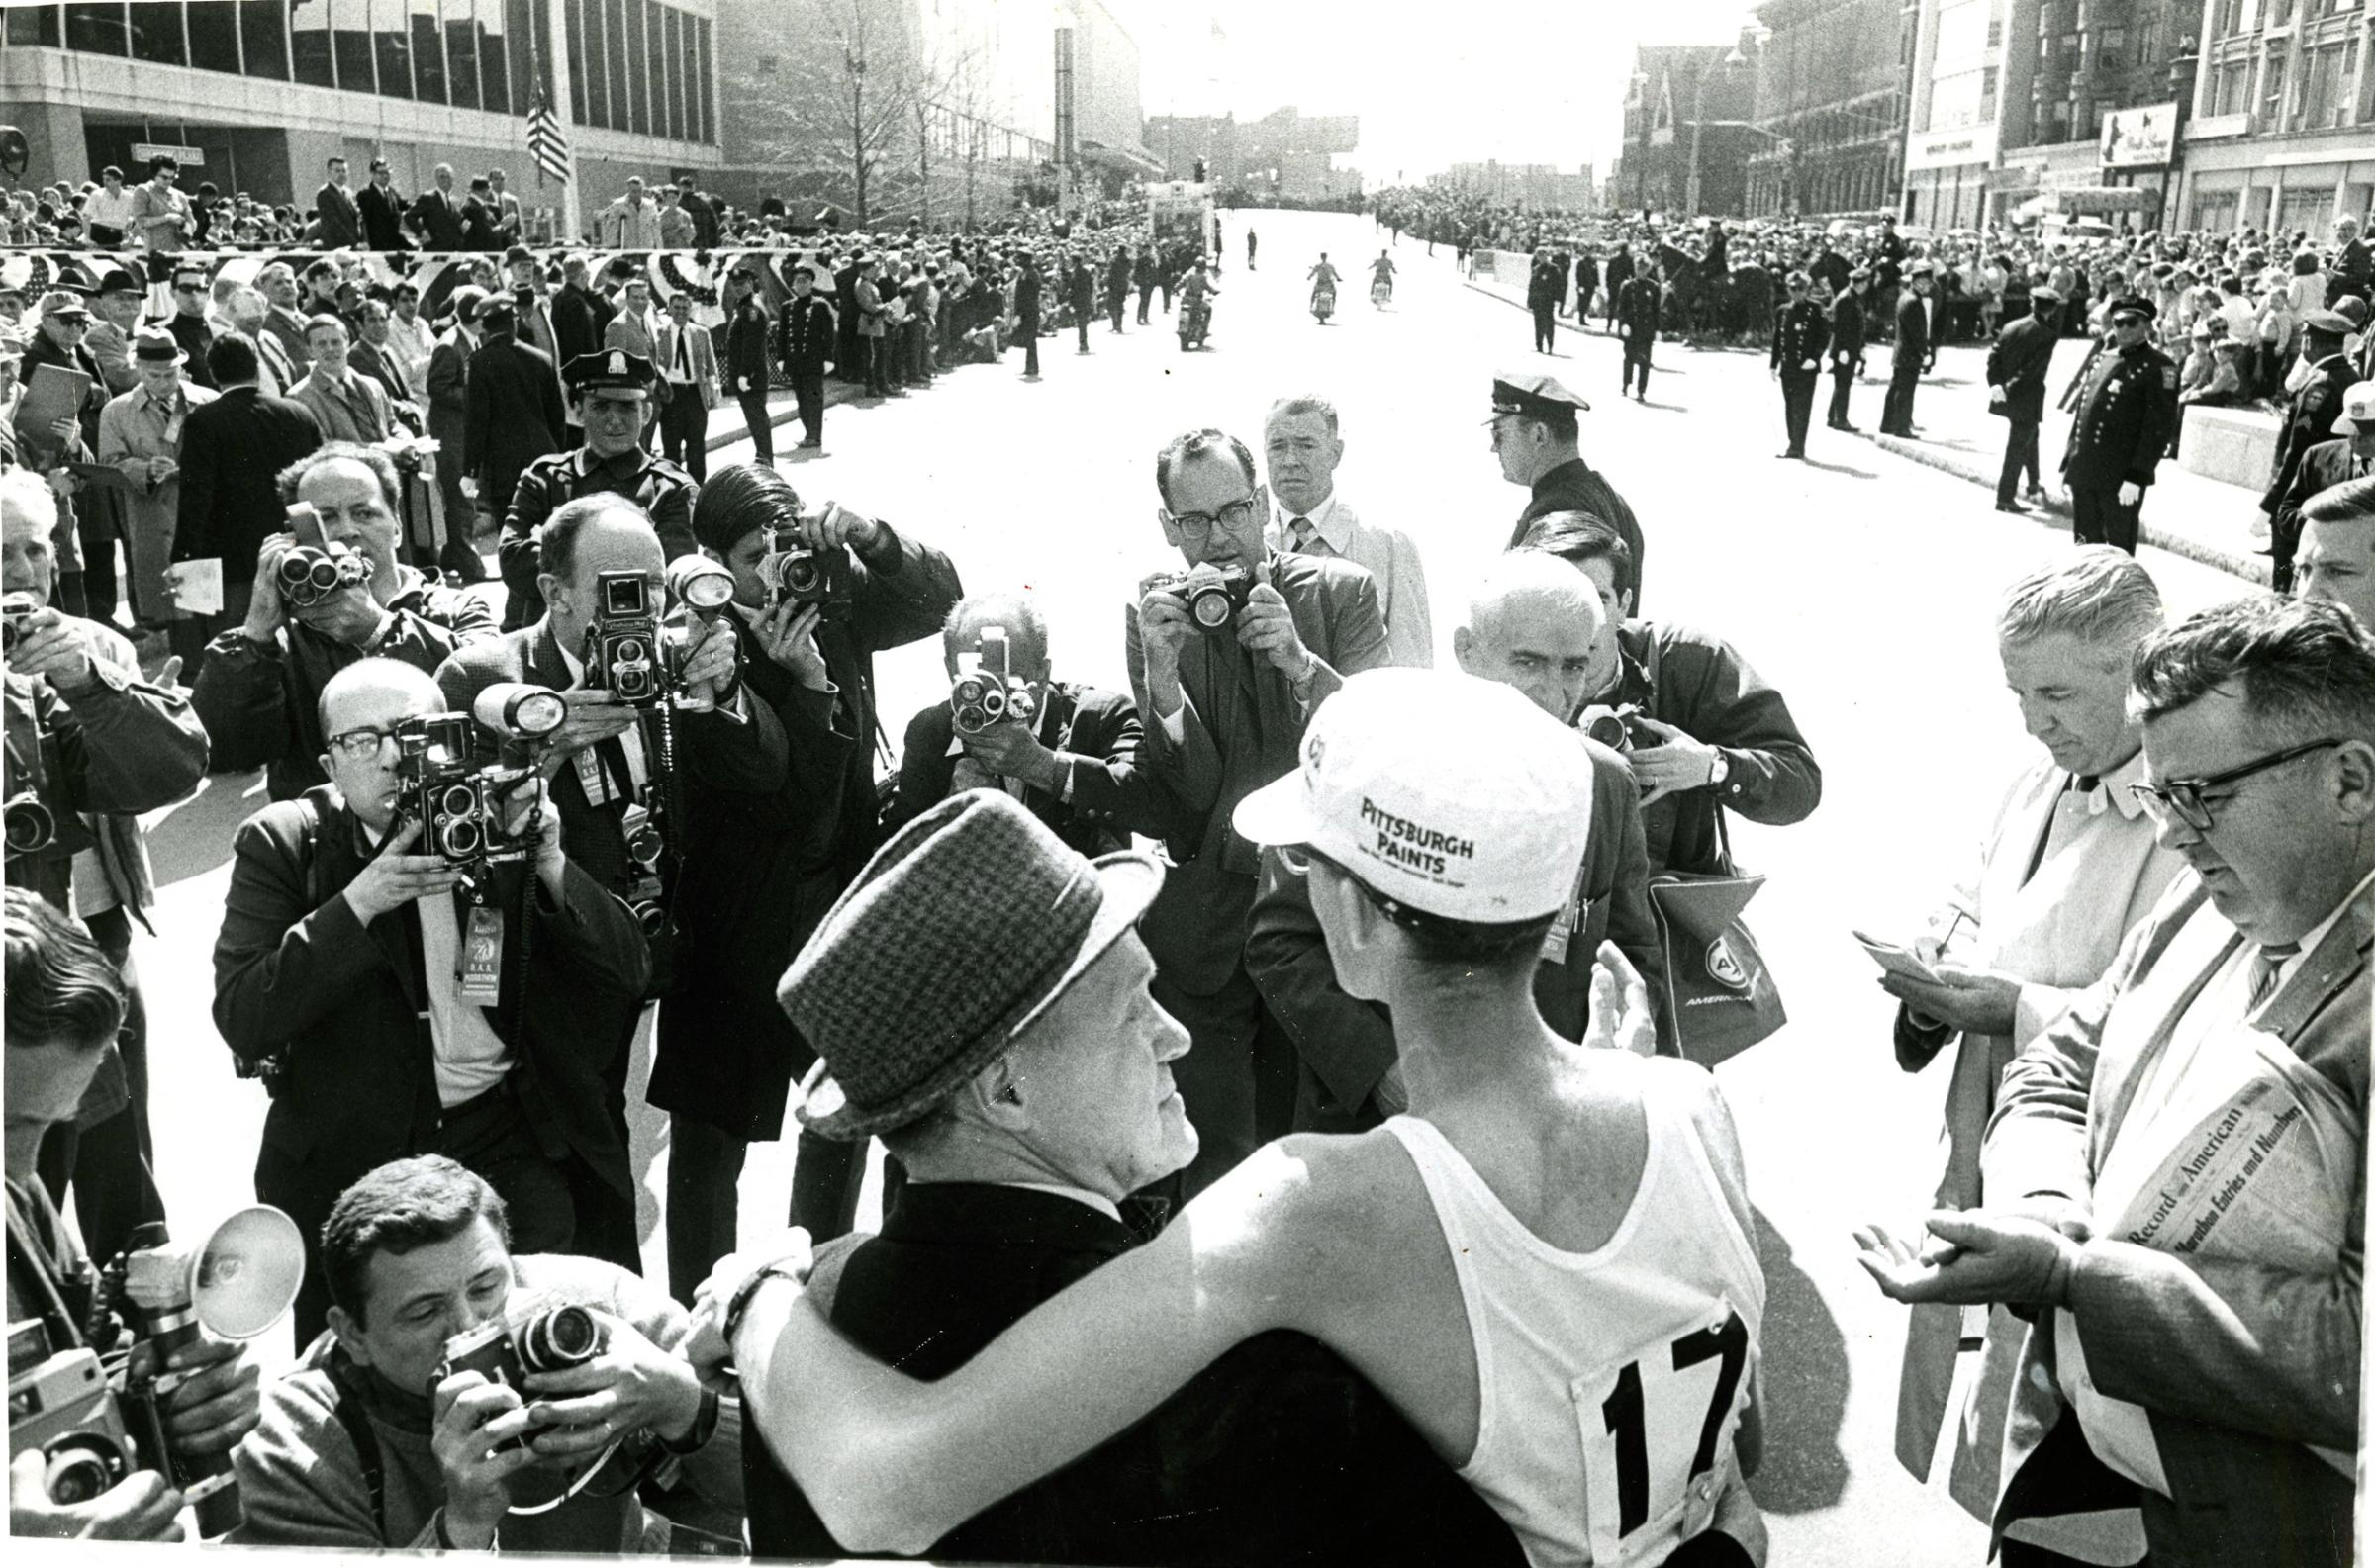 Amby Burfoot, right, and Jock Semple at the finish line of the Boston Marathon, April 19, 1968.